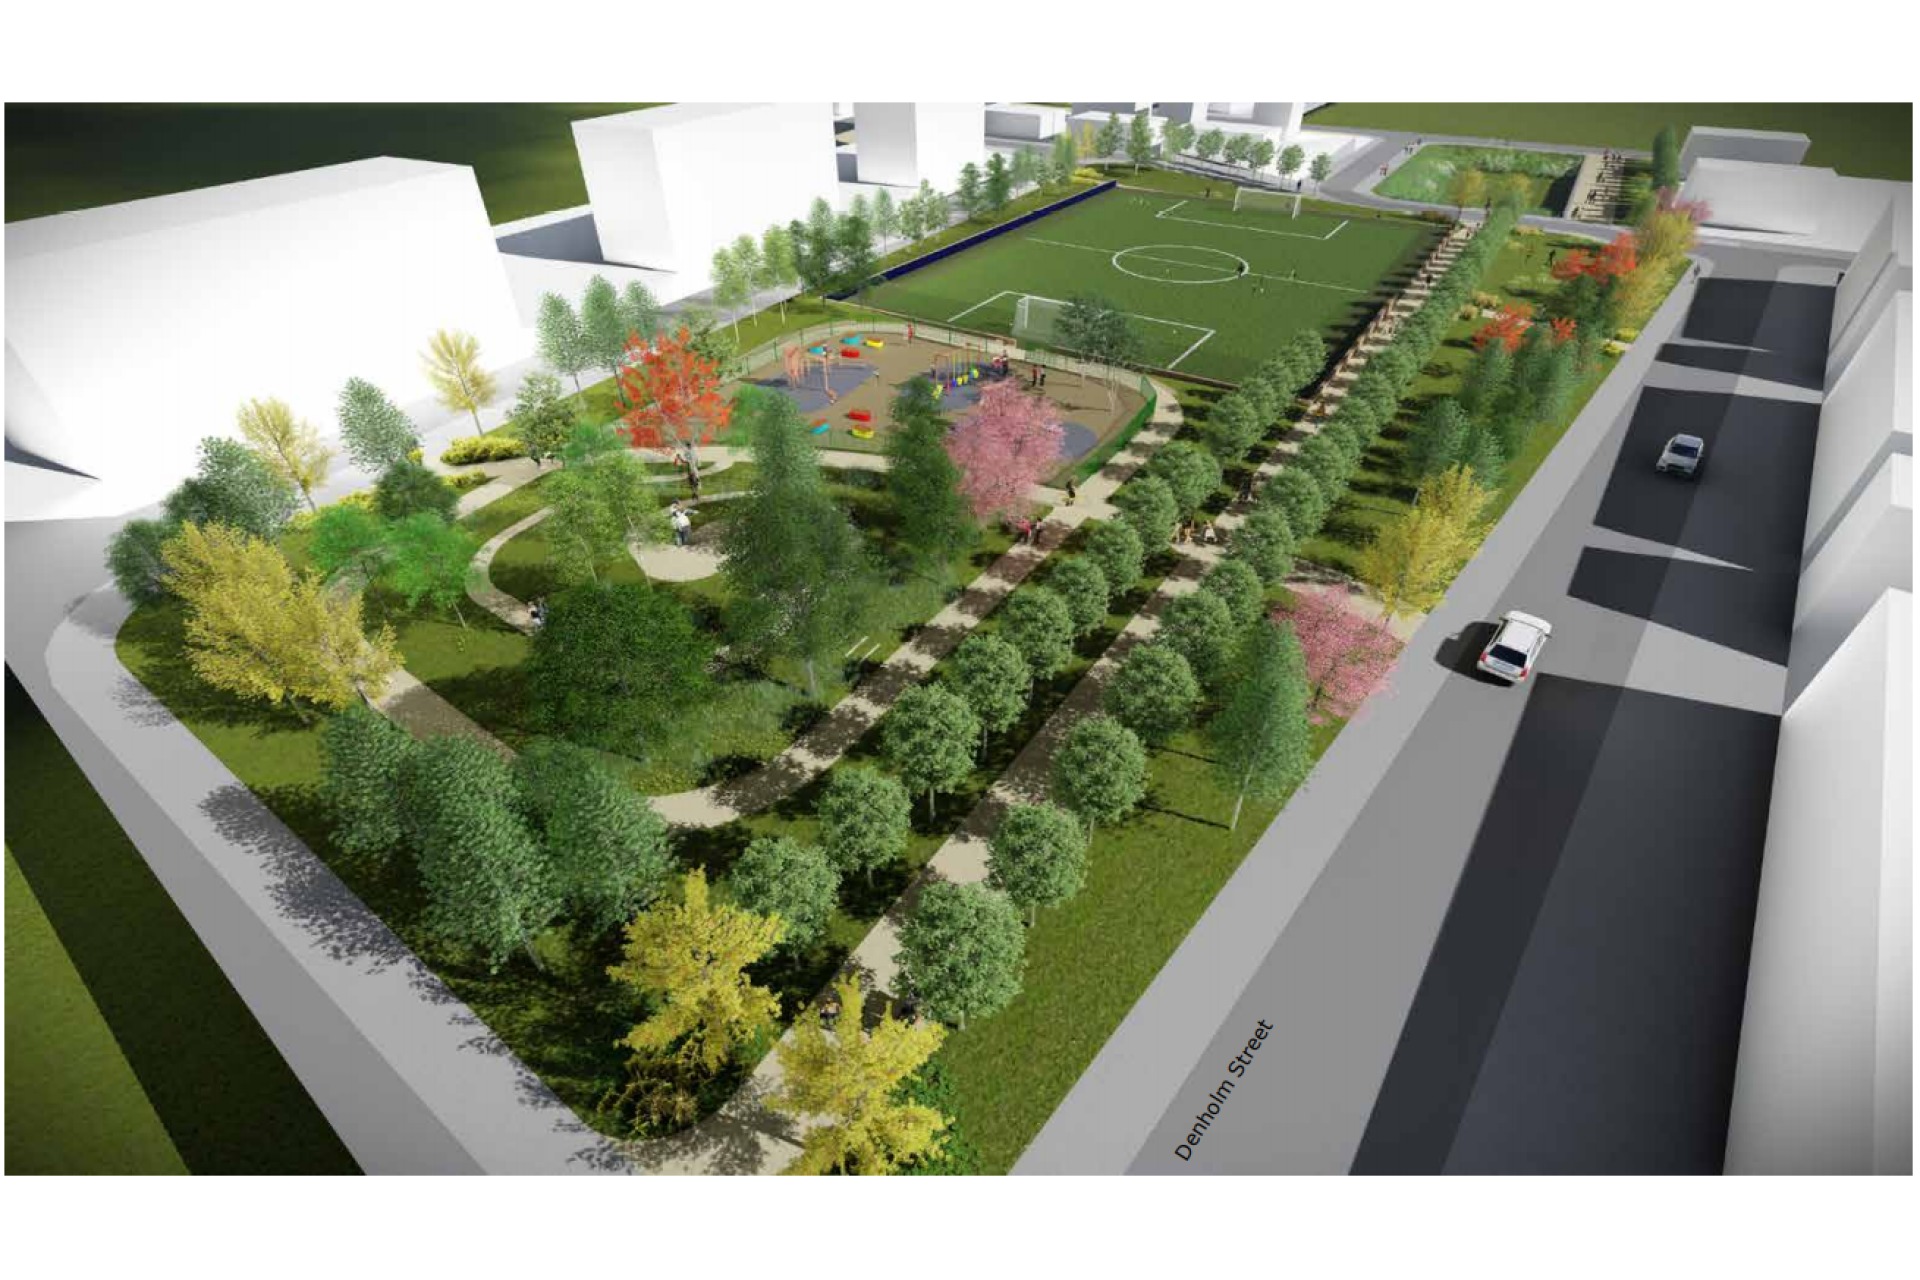 Aerial View of the Play Park Proposals from Denham Street Looking East by LUC